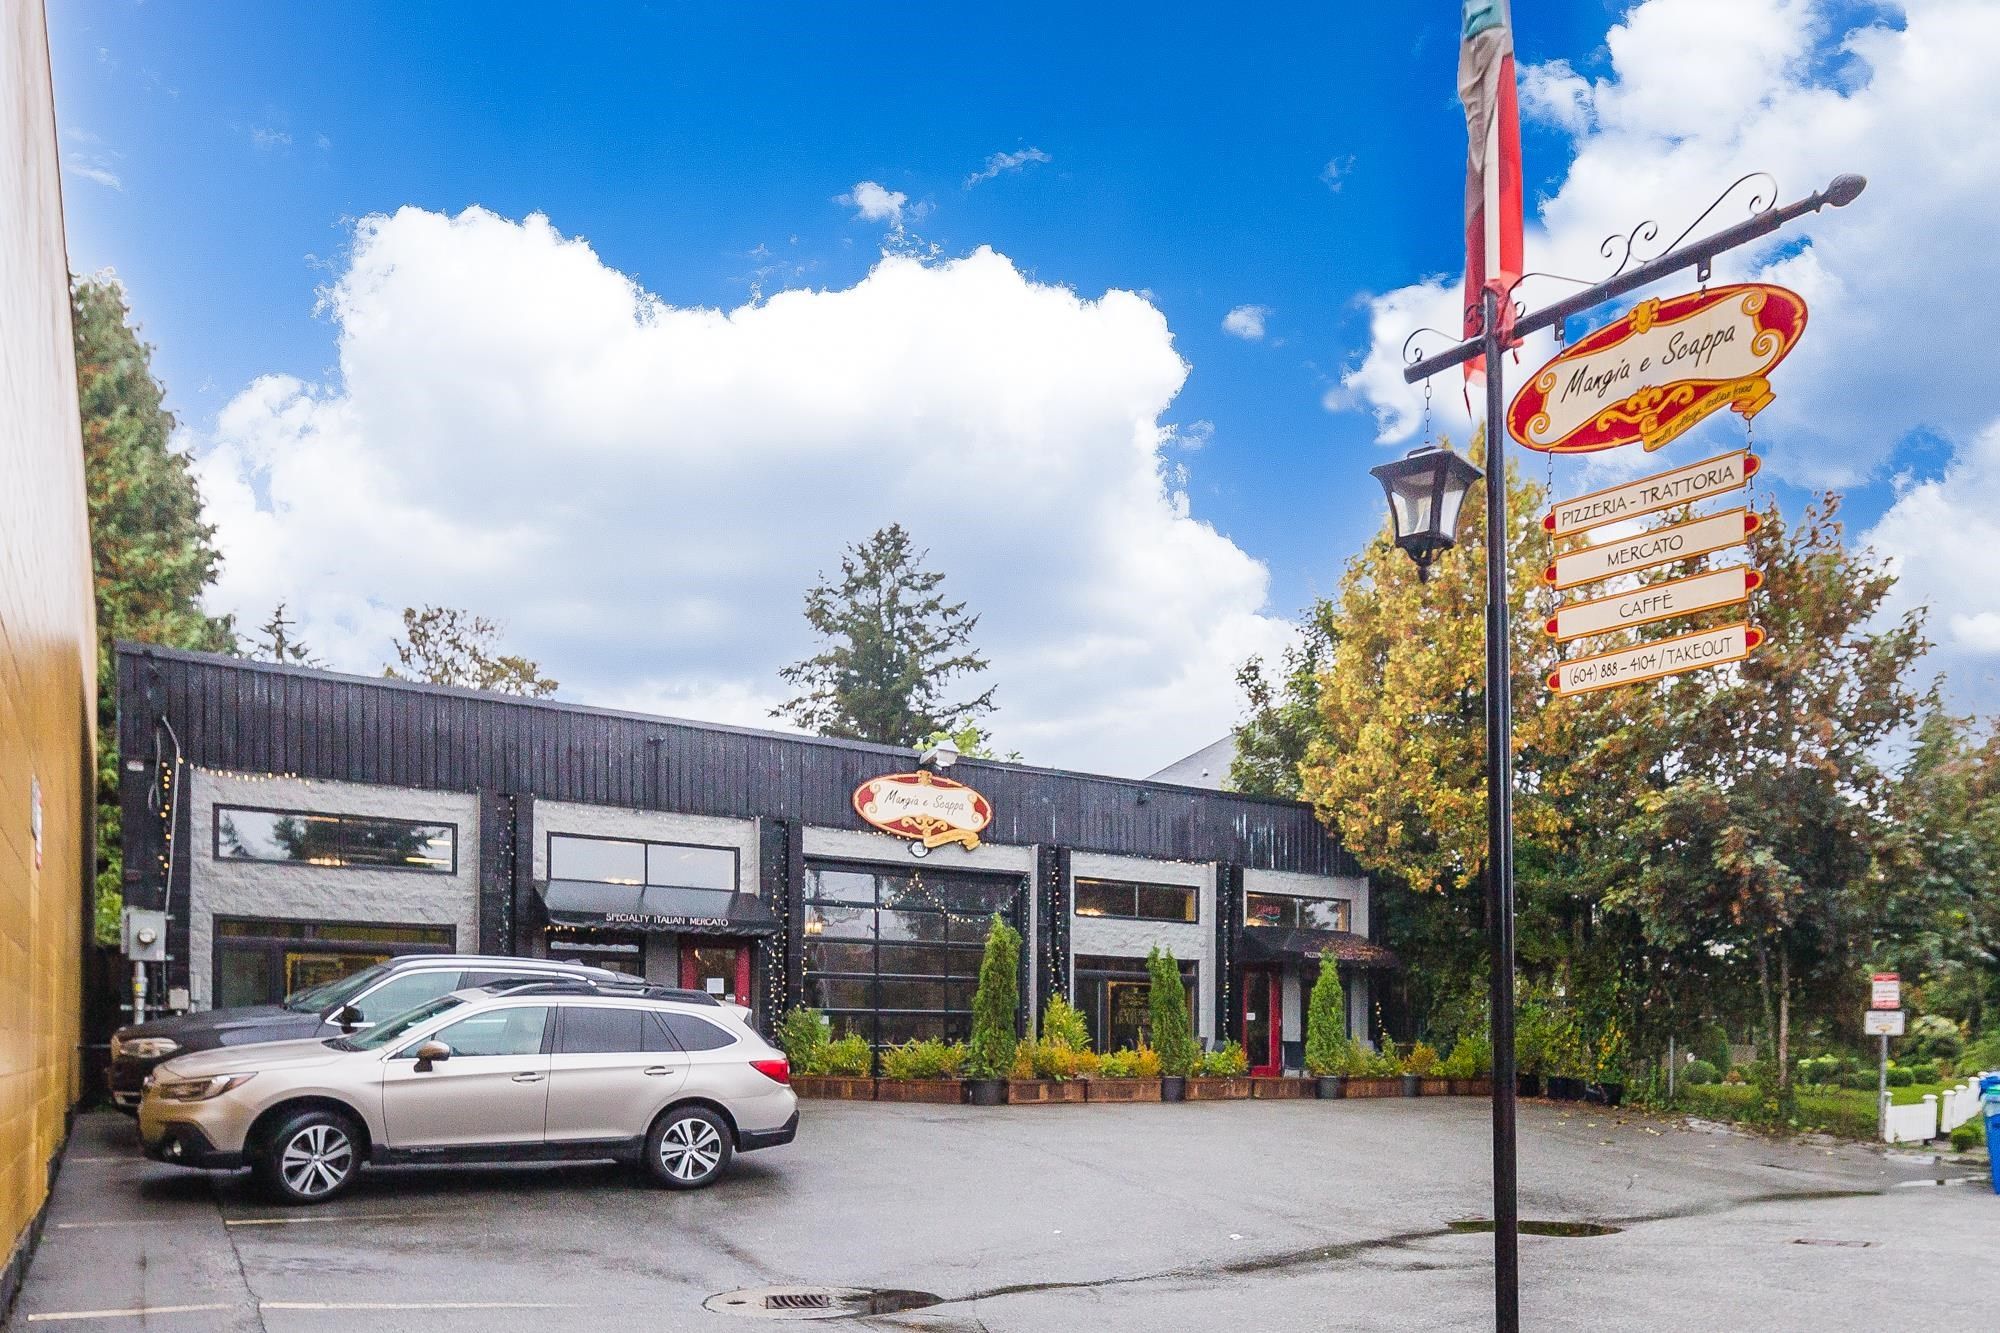 Main Photo: 23238 MAVIS Avenue in Langley: Fort Langley Business for sale : MLS®# C8047769